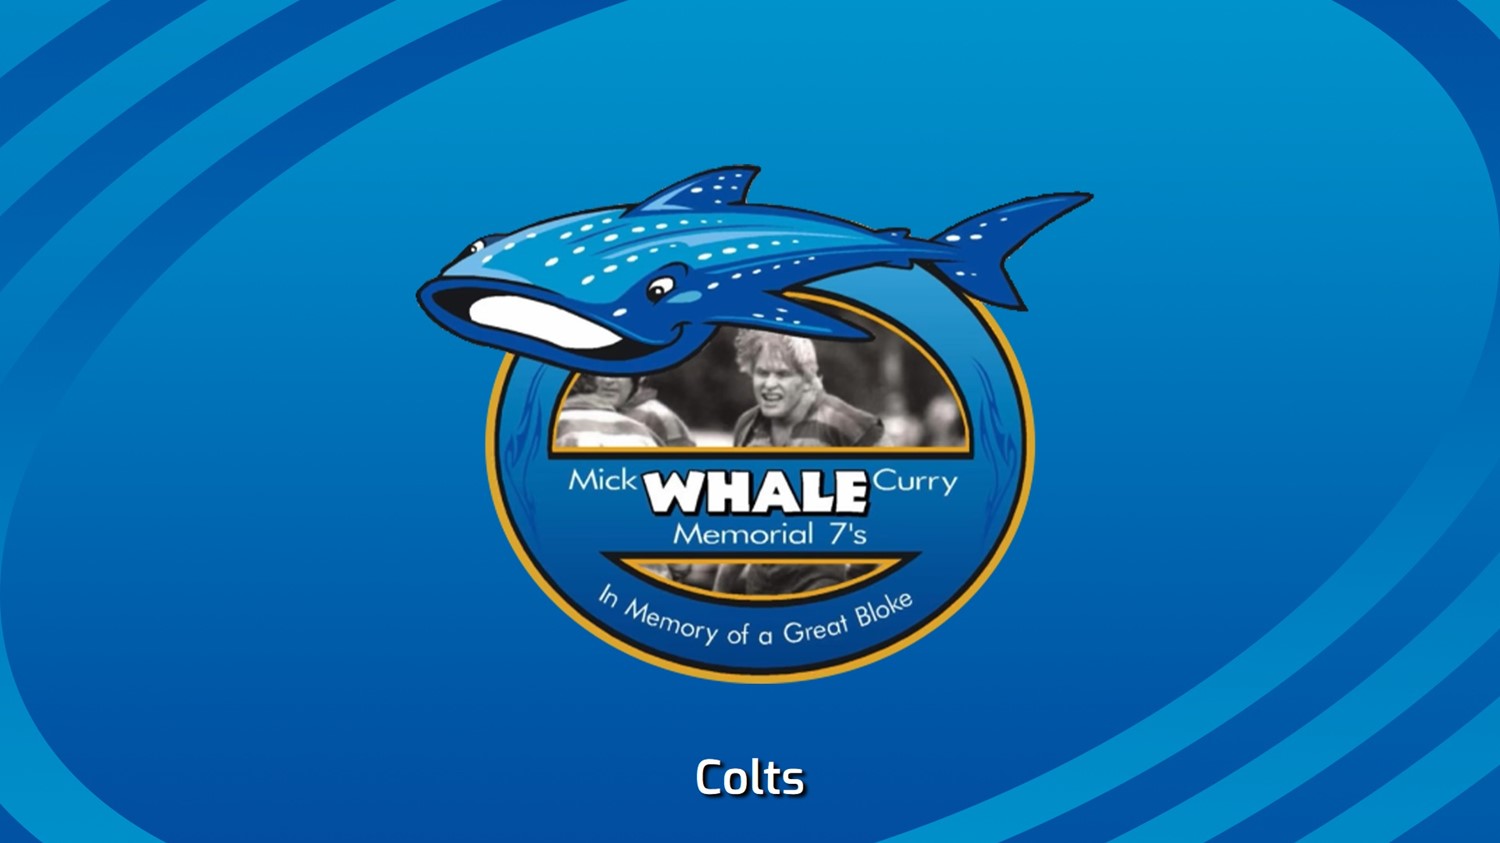 240210-Mick "Whale" Curry Memorial Rugby Sevens Grand Final - Colts - Gordon v Eastwood Minigame Slate Image